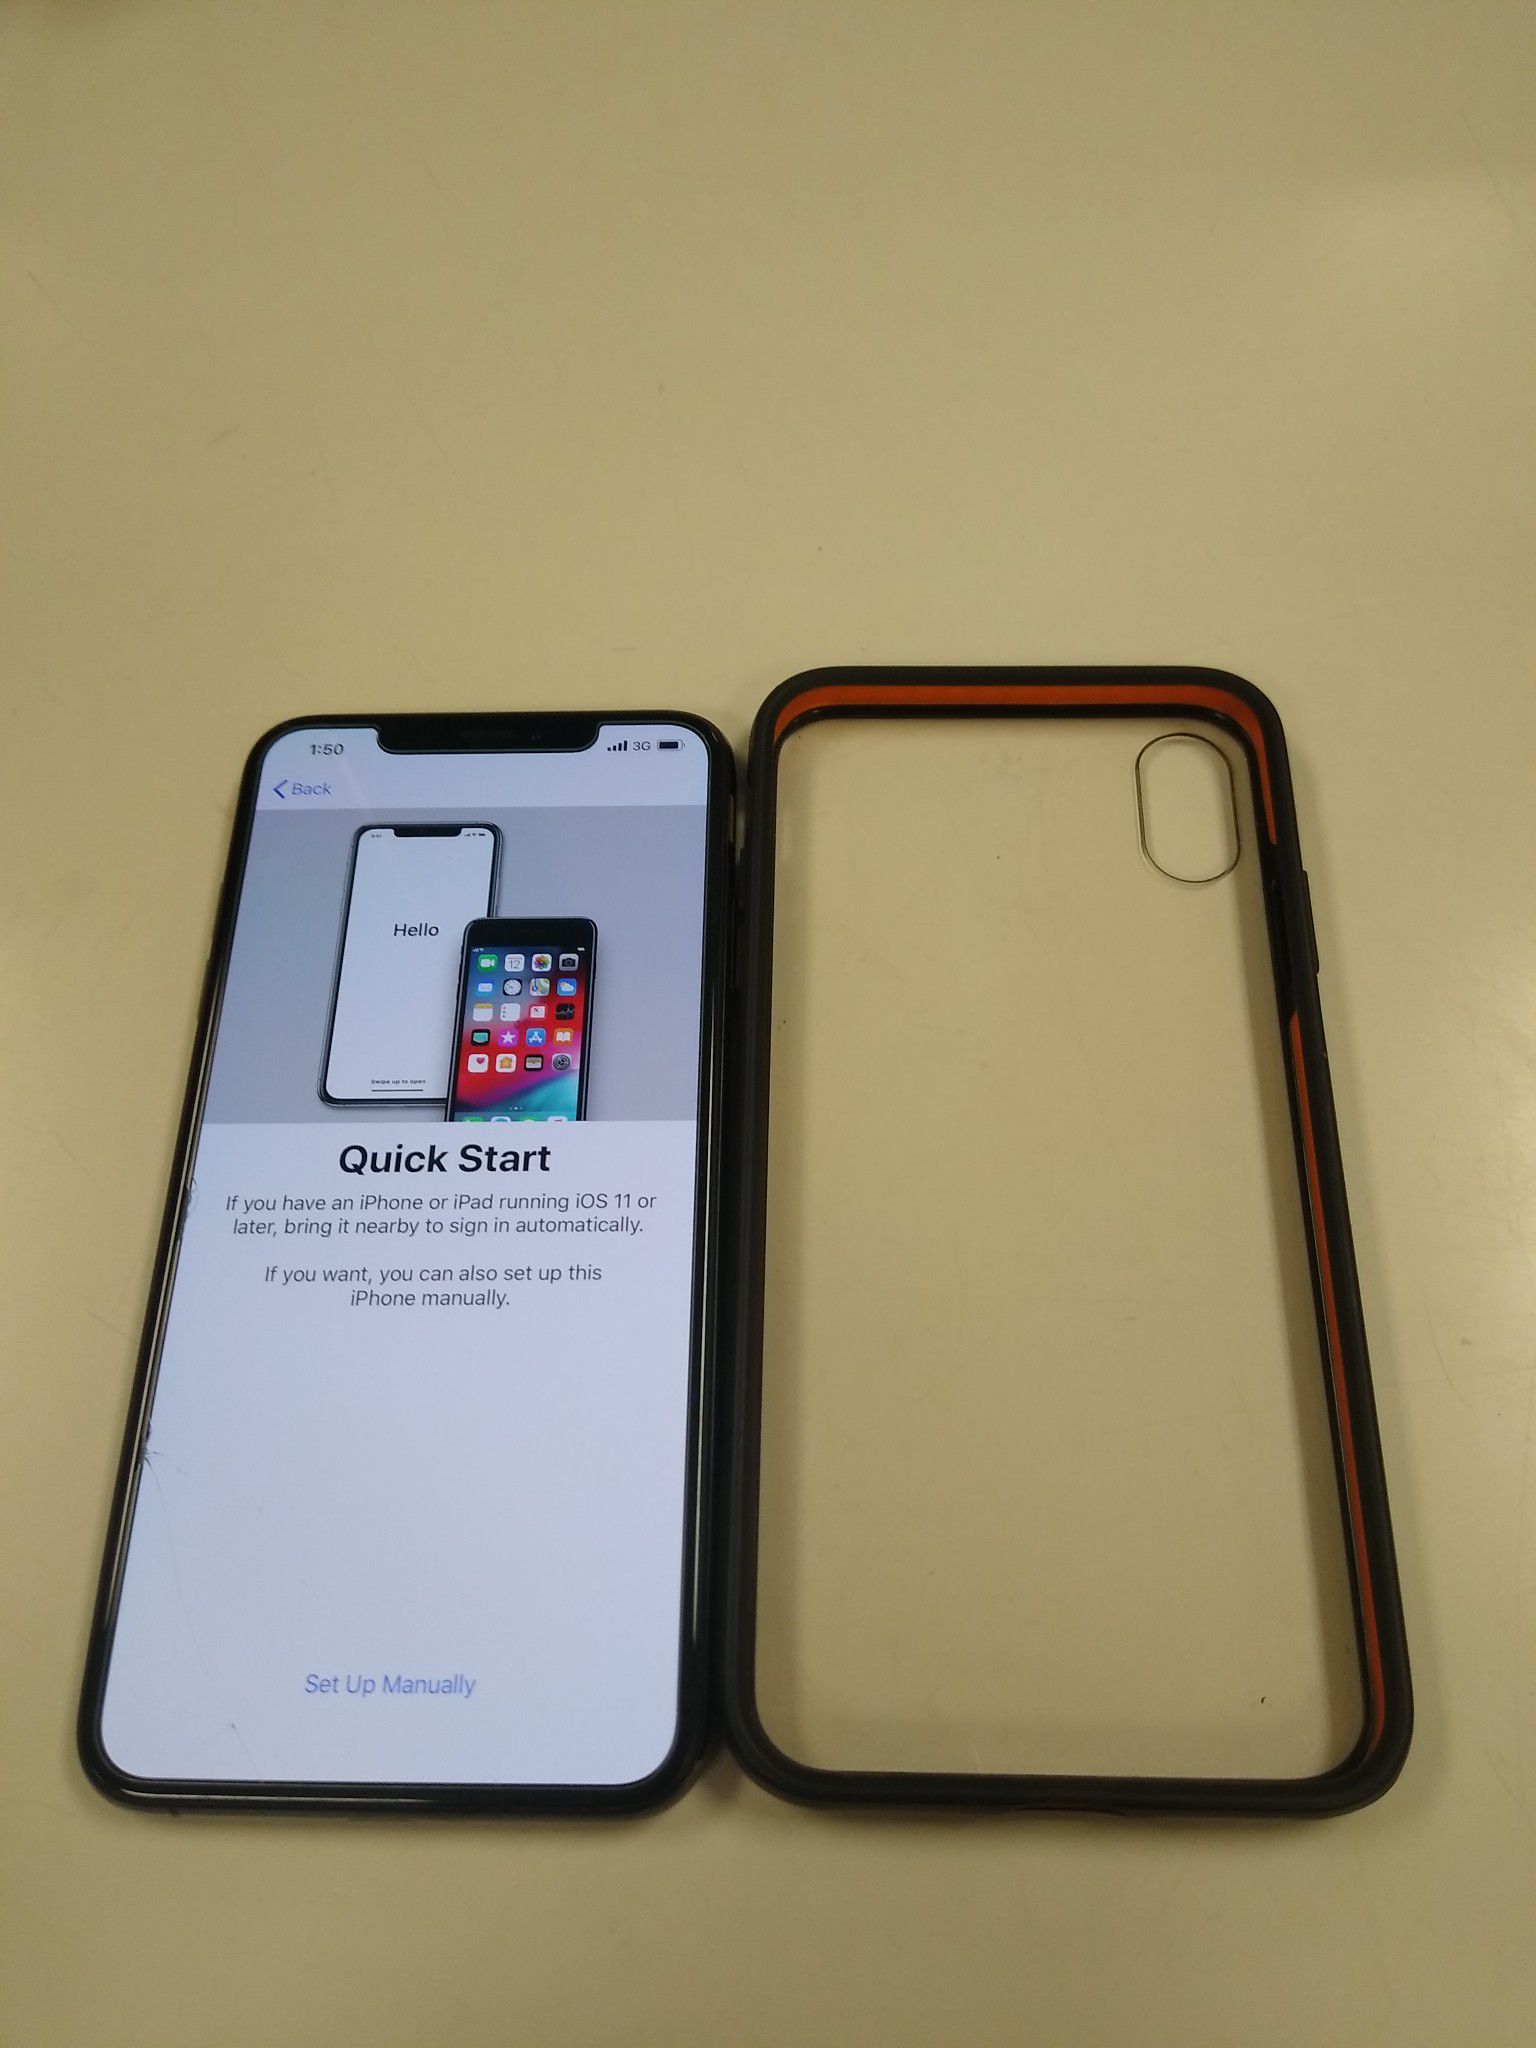 iPhone 7 and iPhone XS Max 256gb both iCloud Locked